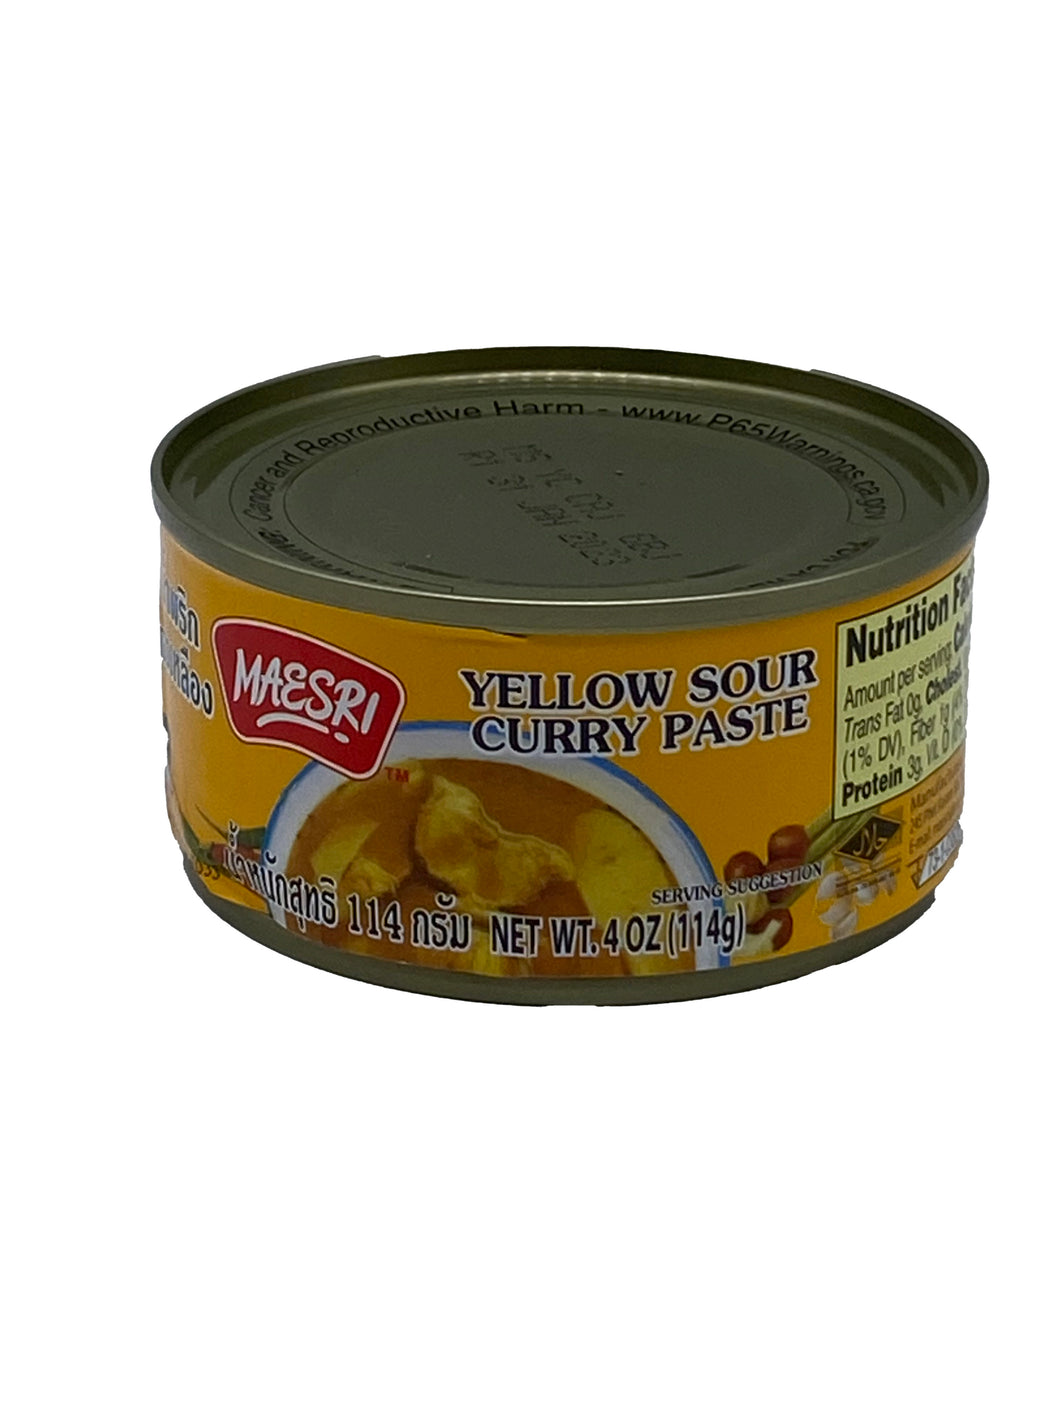 Maesri Yellow Sour Curry Paste